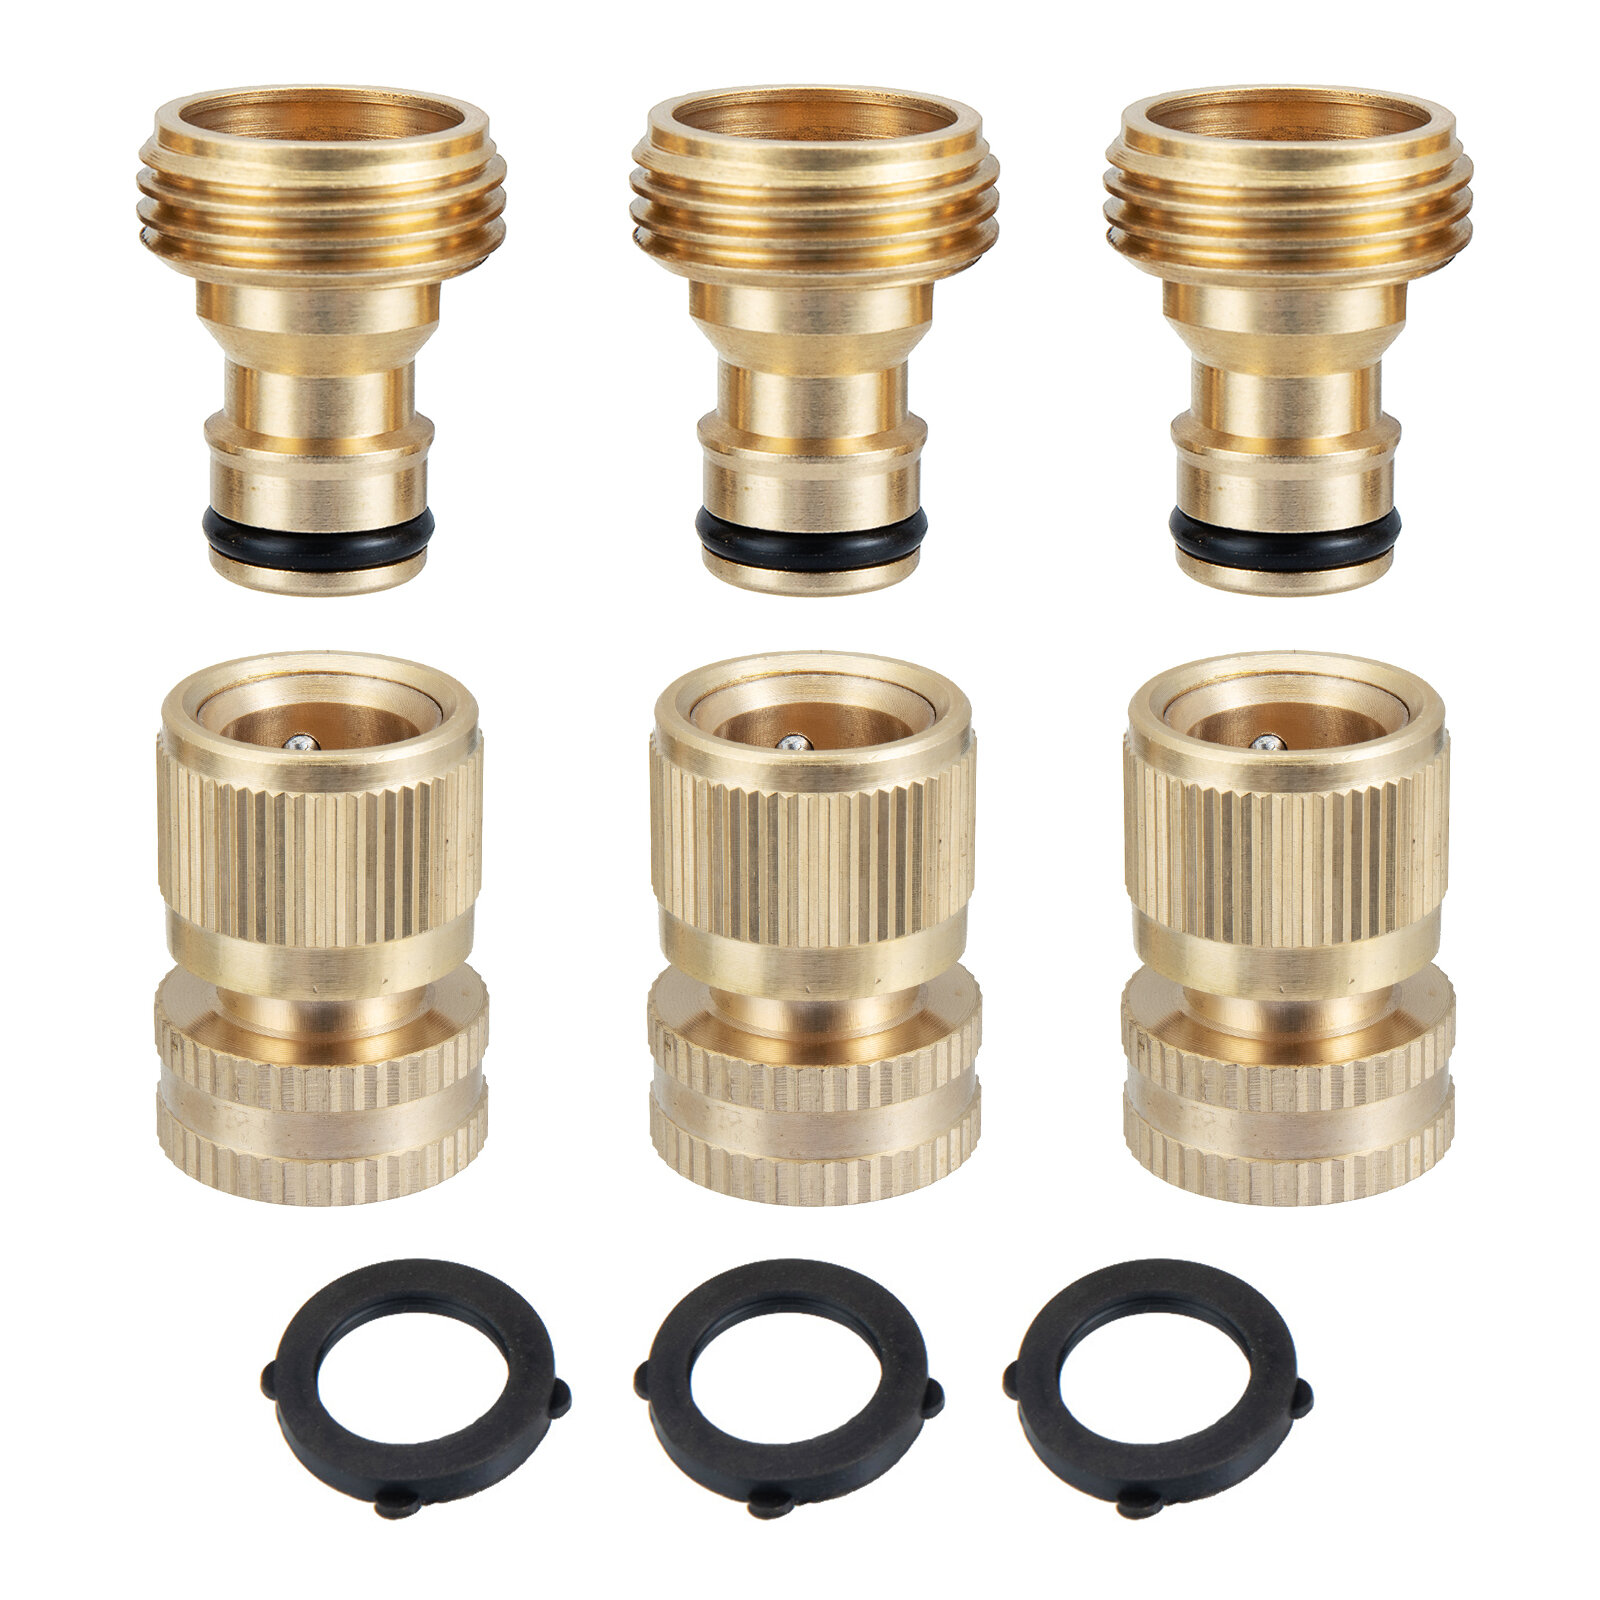 

3 Sets Brass Pipe Hex Nipple Fitting Quick Coupler Adapter 3/4"GHT Brass Male to Female Thread Brass Pipe Connectors